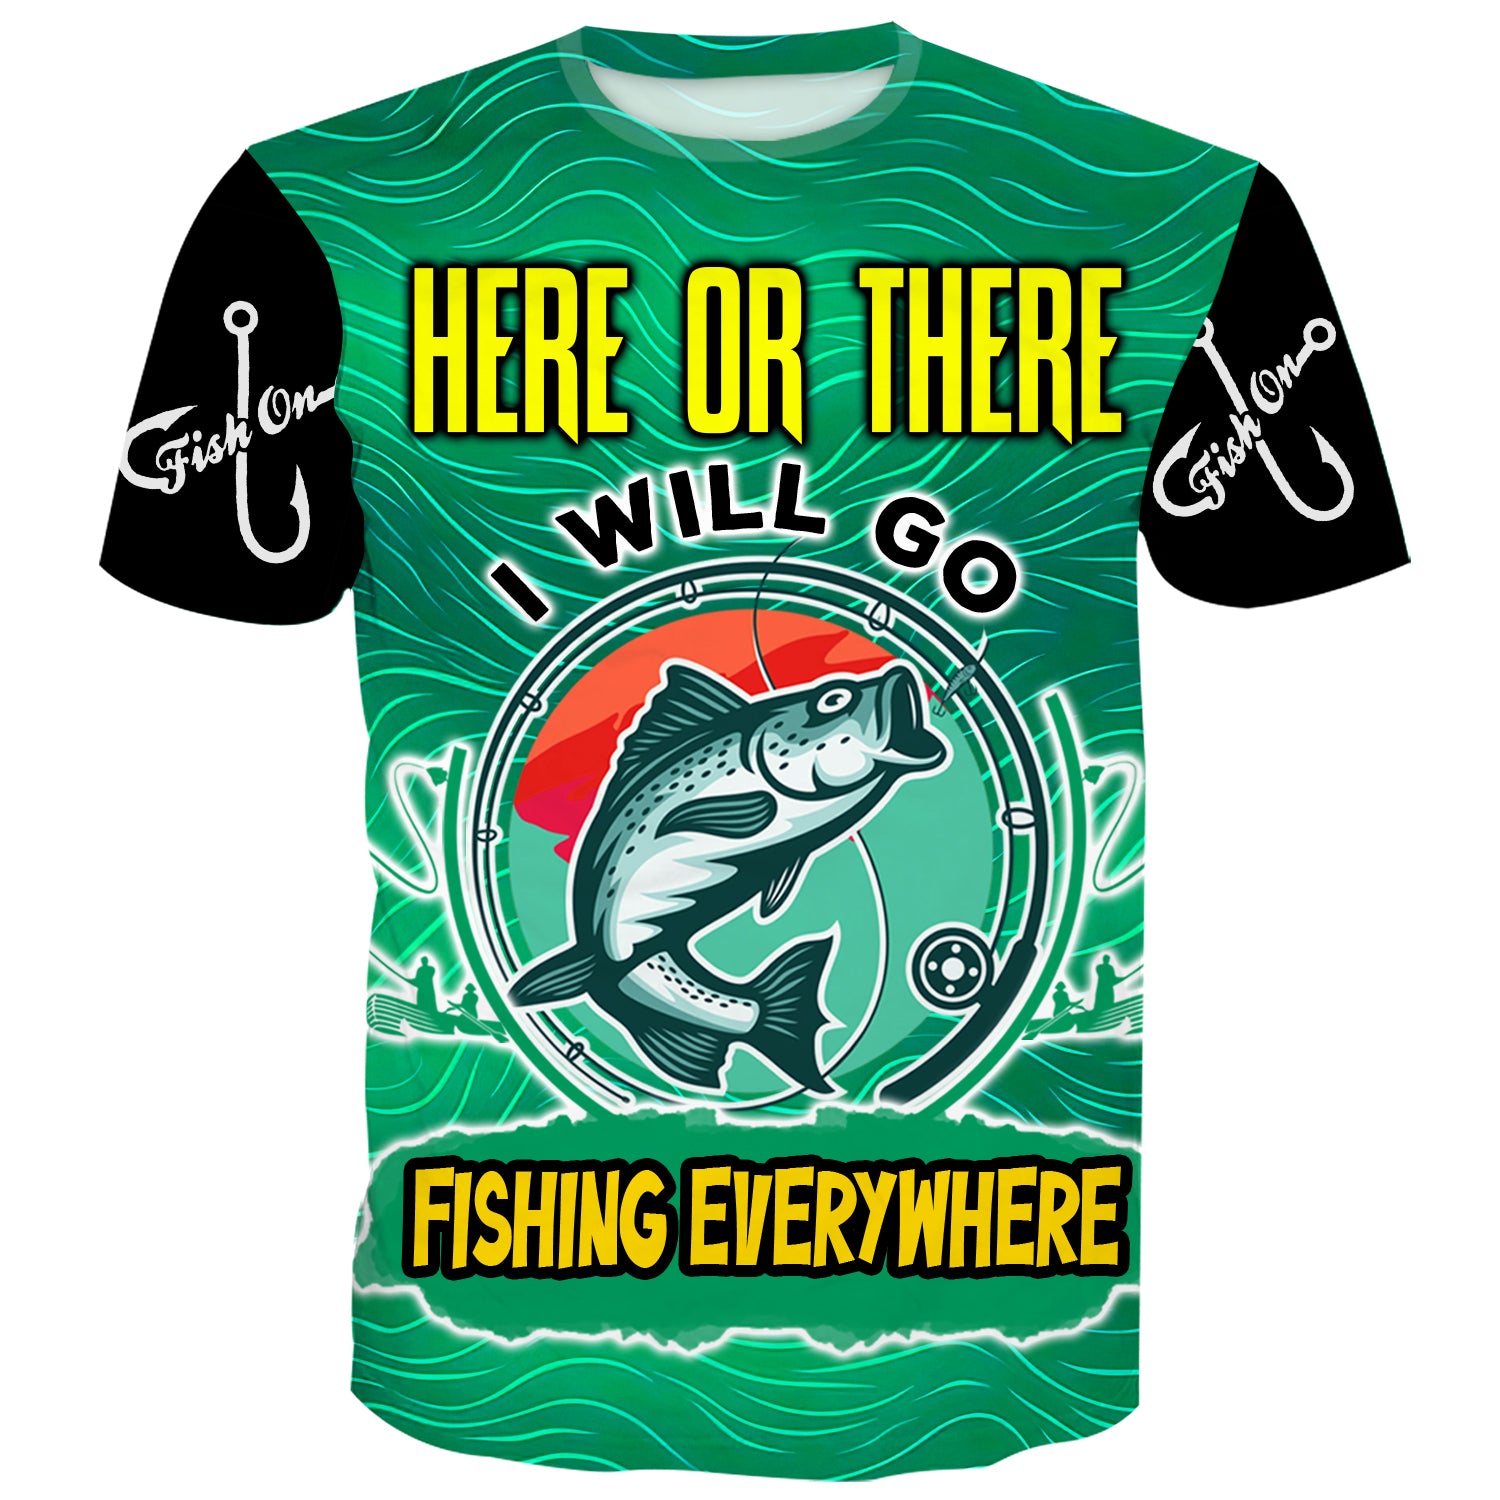 Here or There I will go Fishing everywhere - Fishing T-Shirt